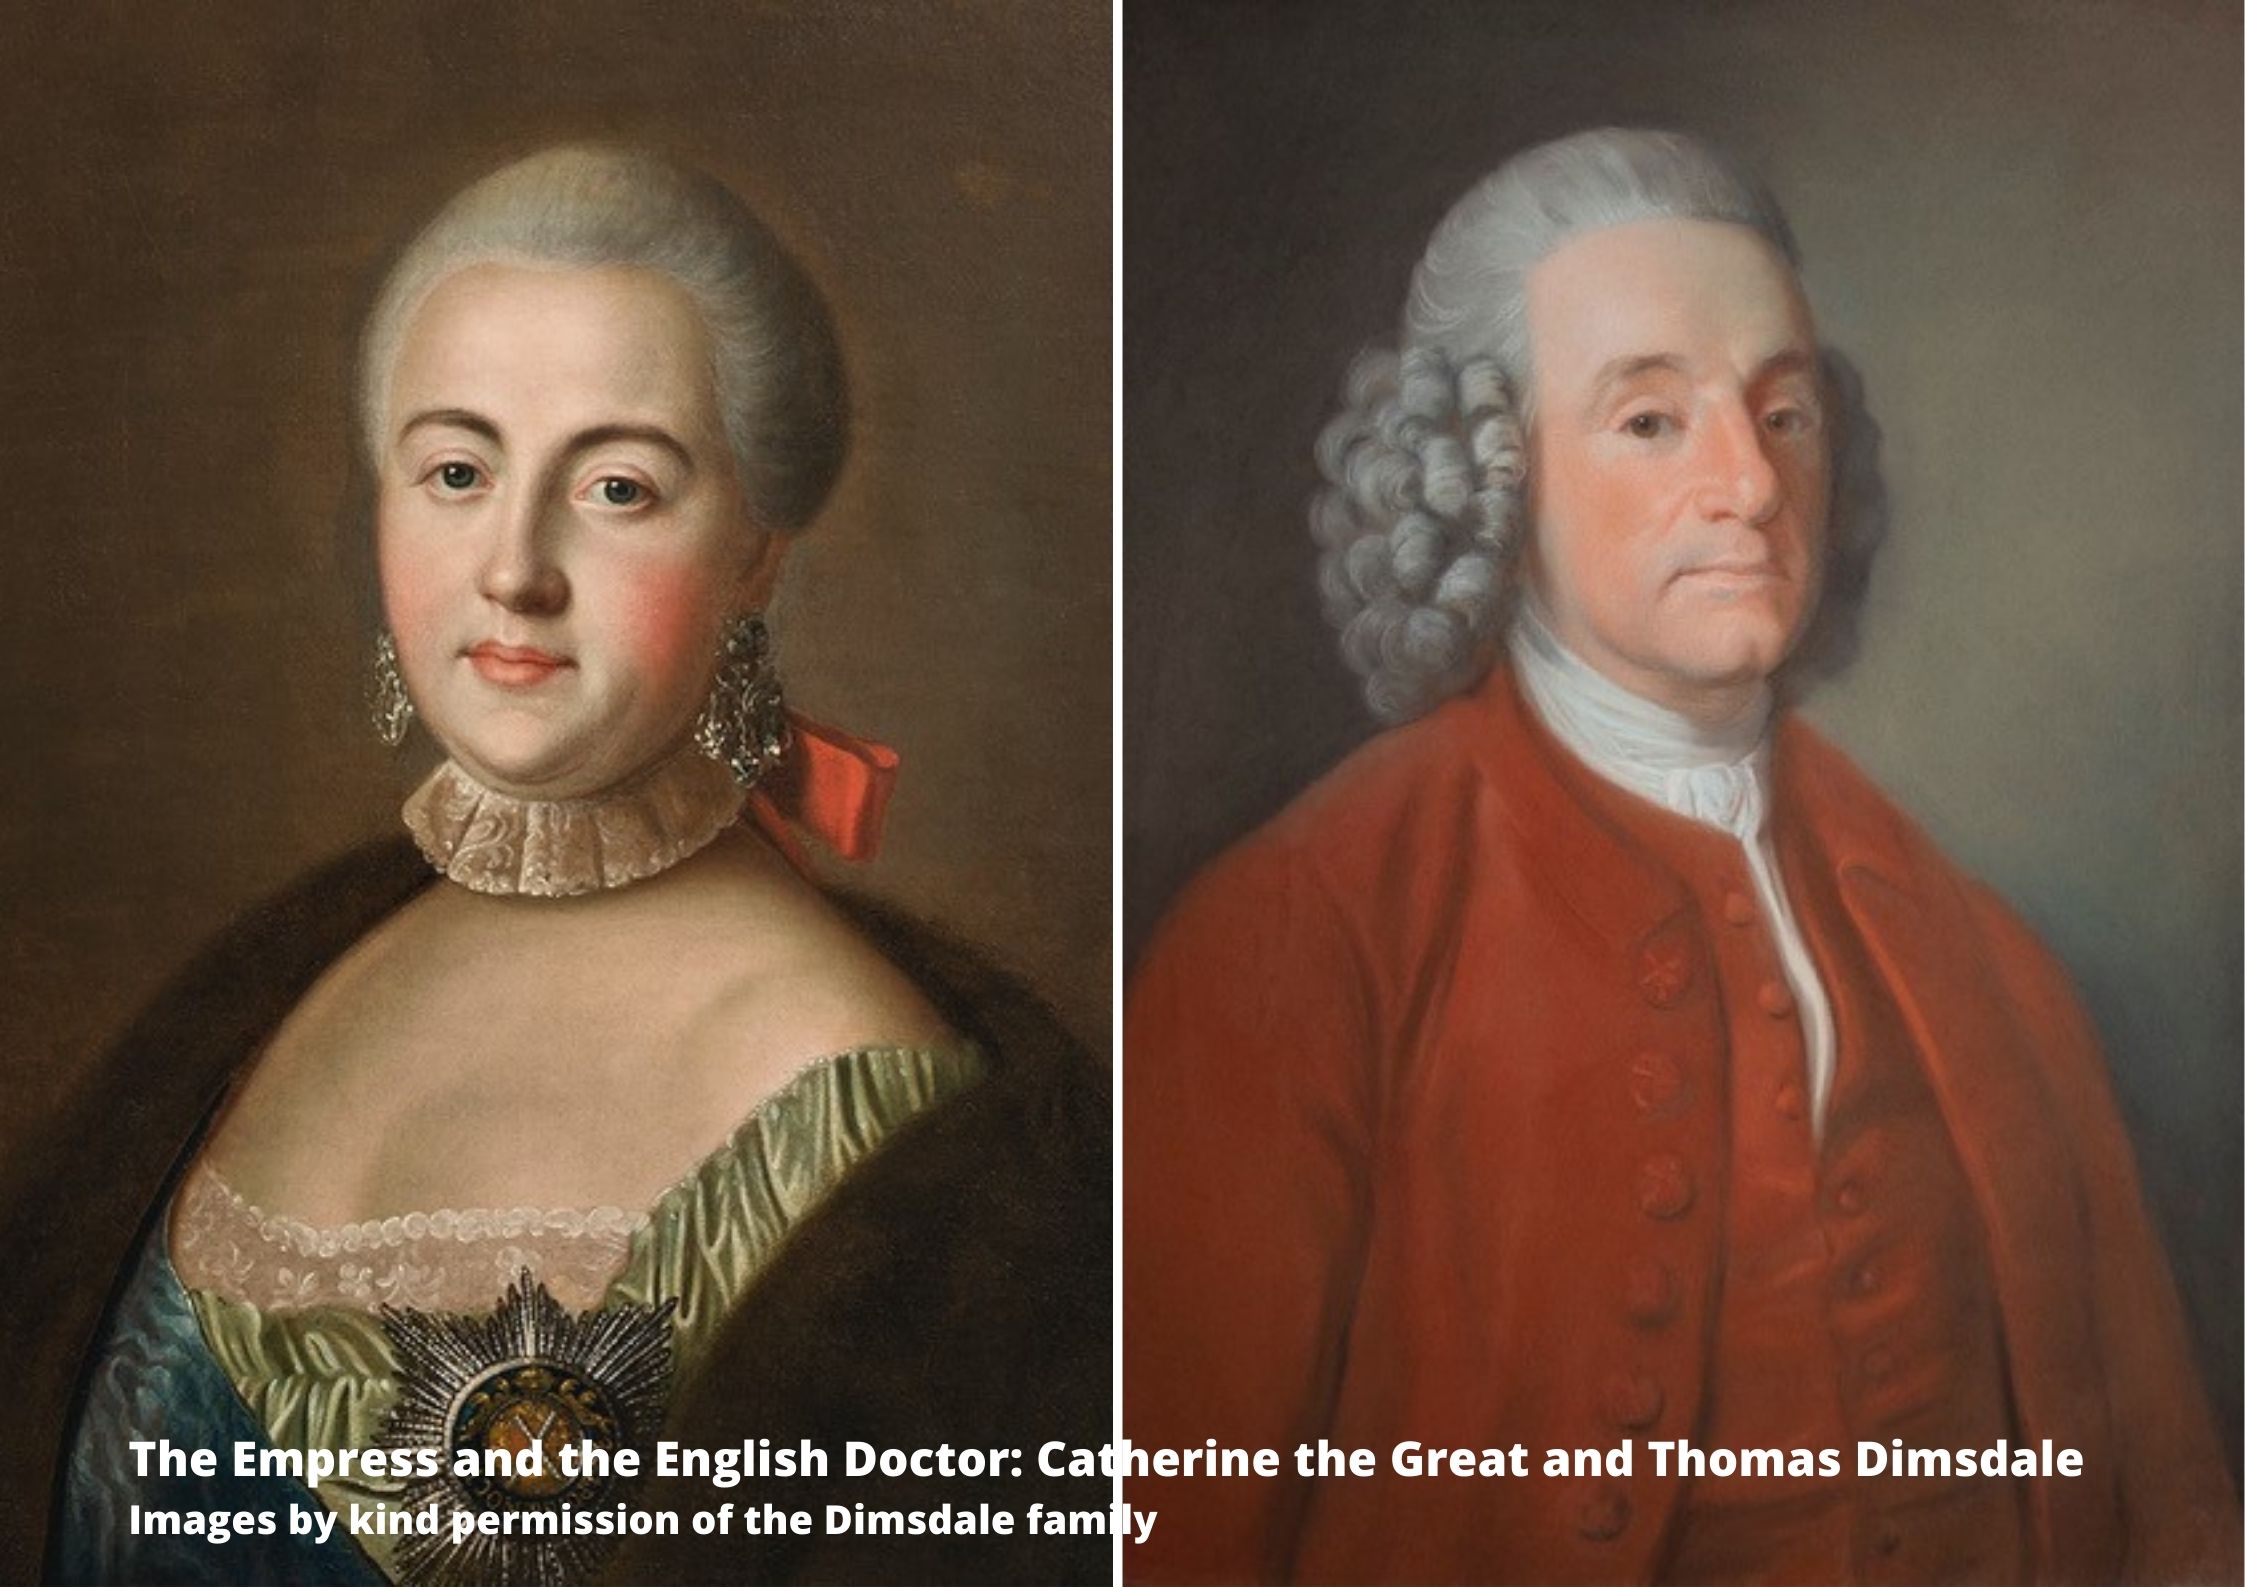 A collage of two people: Catherine the Great and Dr Thomas Dimsdale